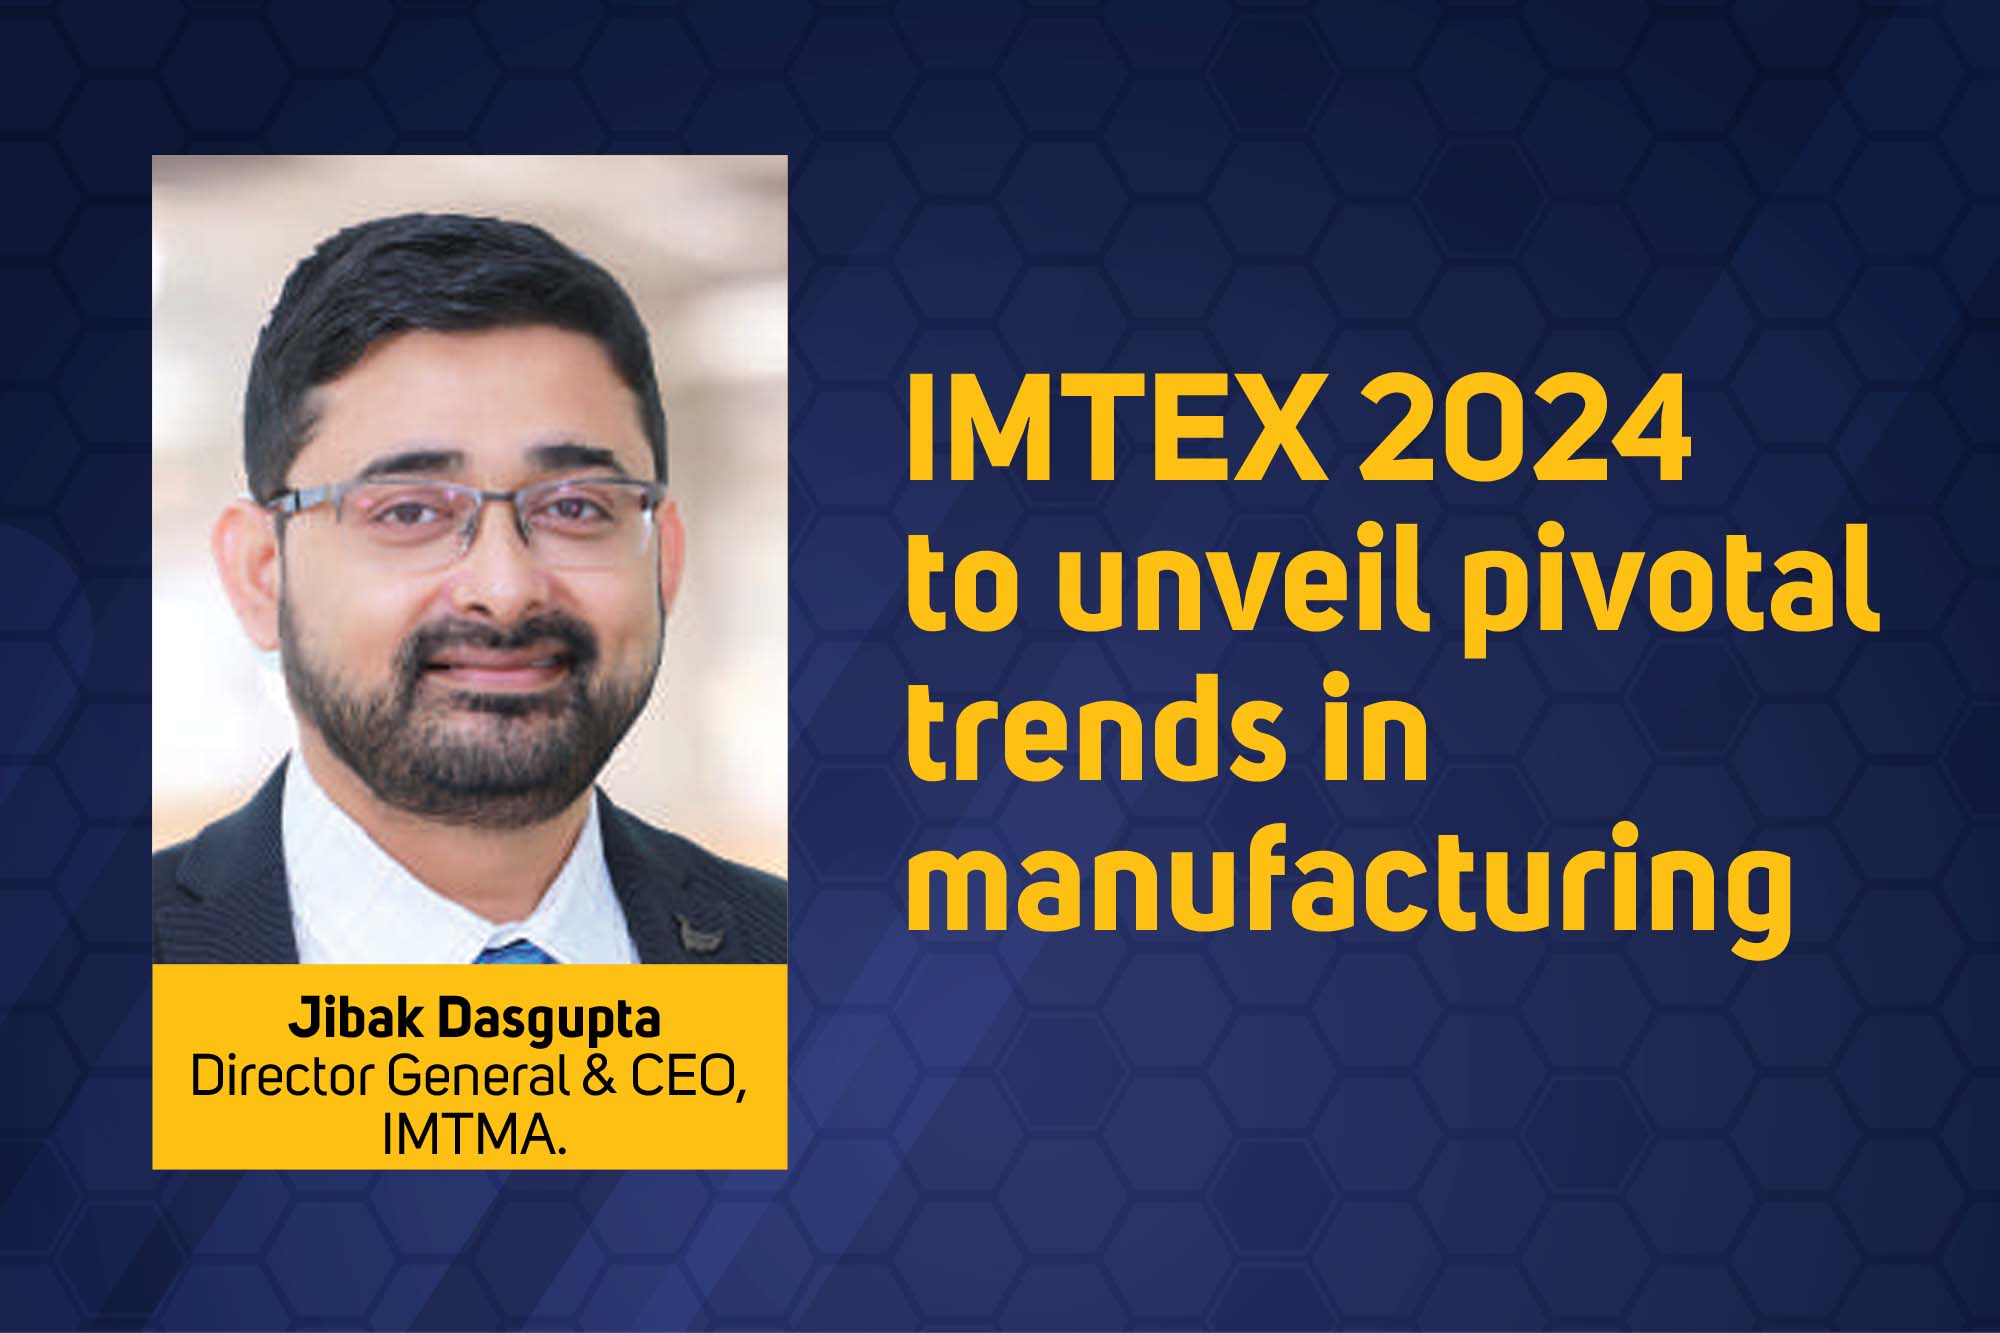 IMTEX 2024 to unveil pivotal trends in manufacturing